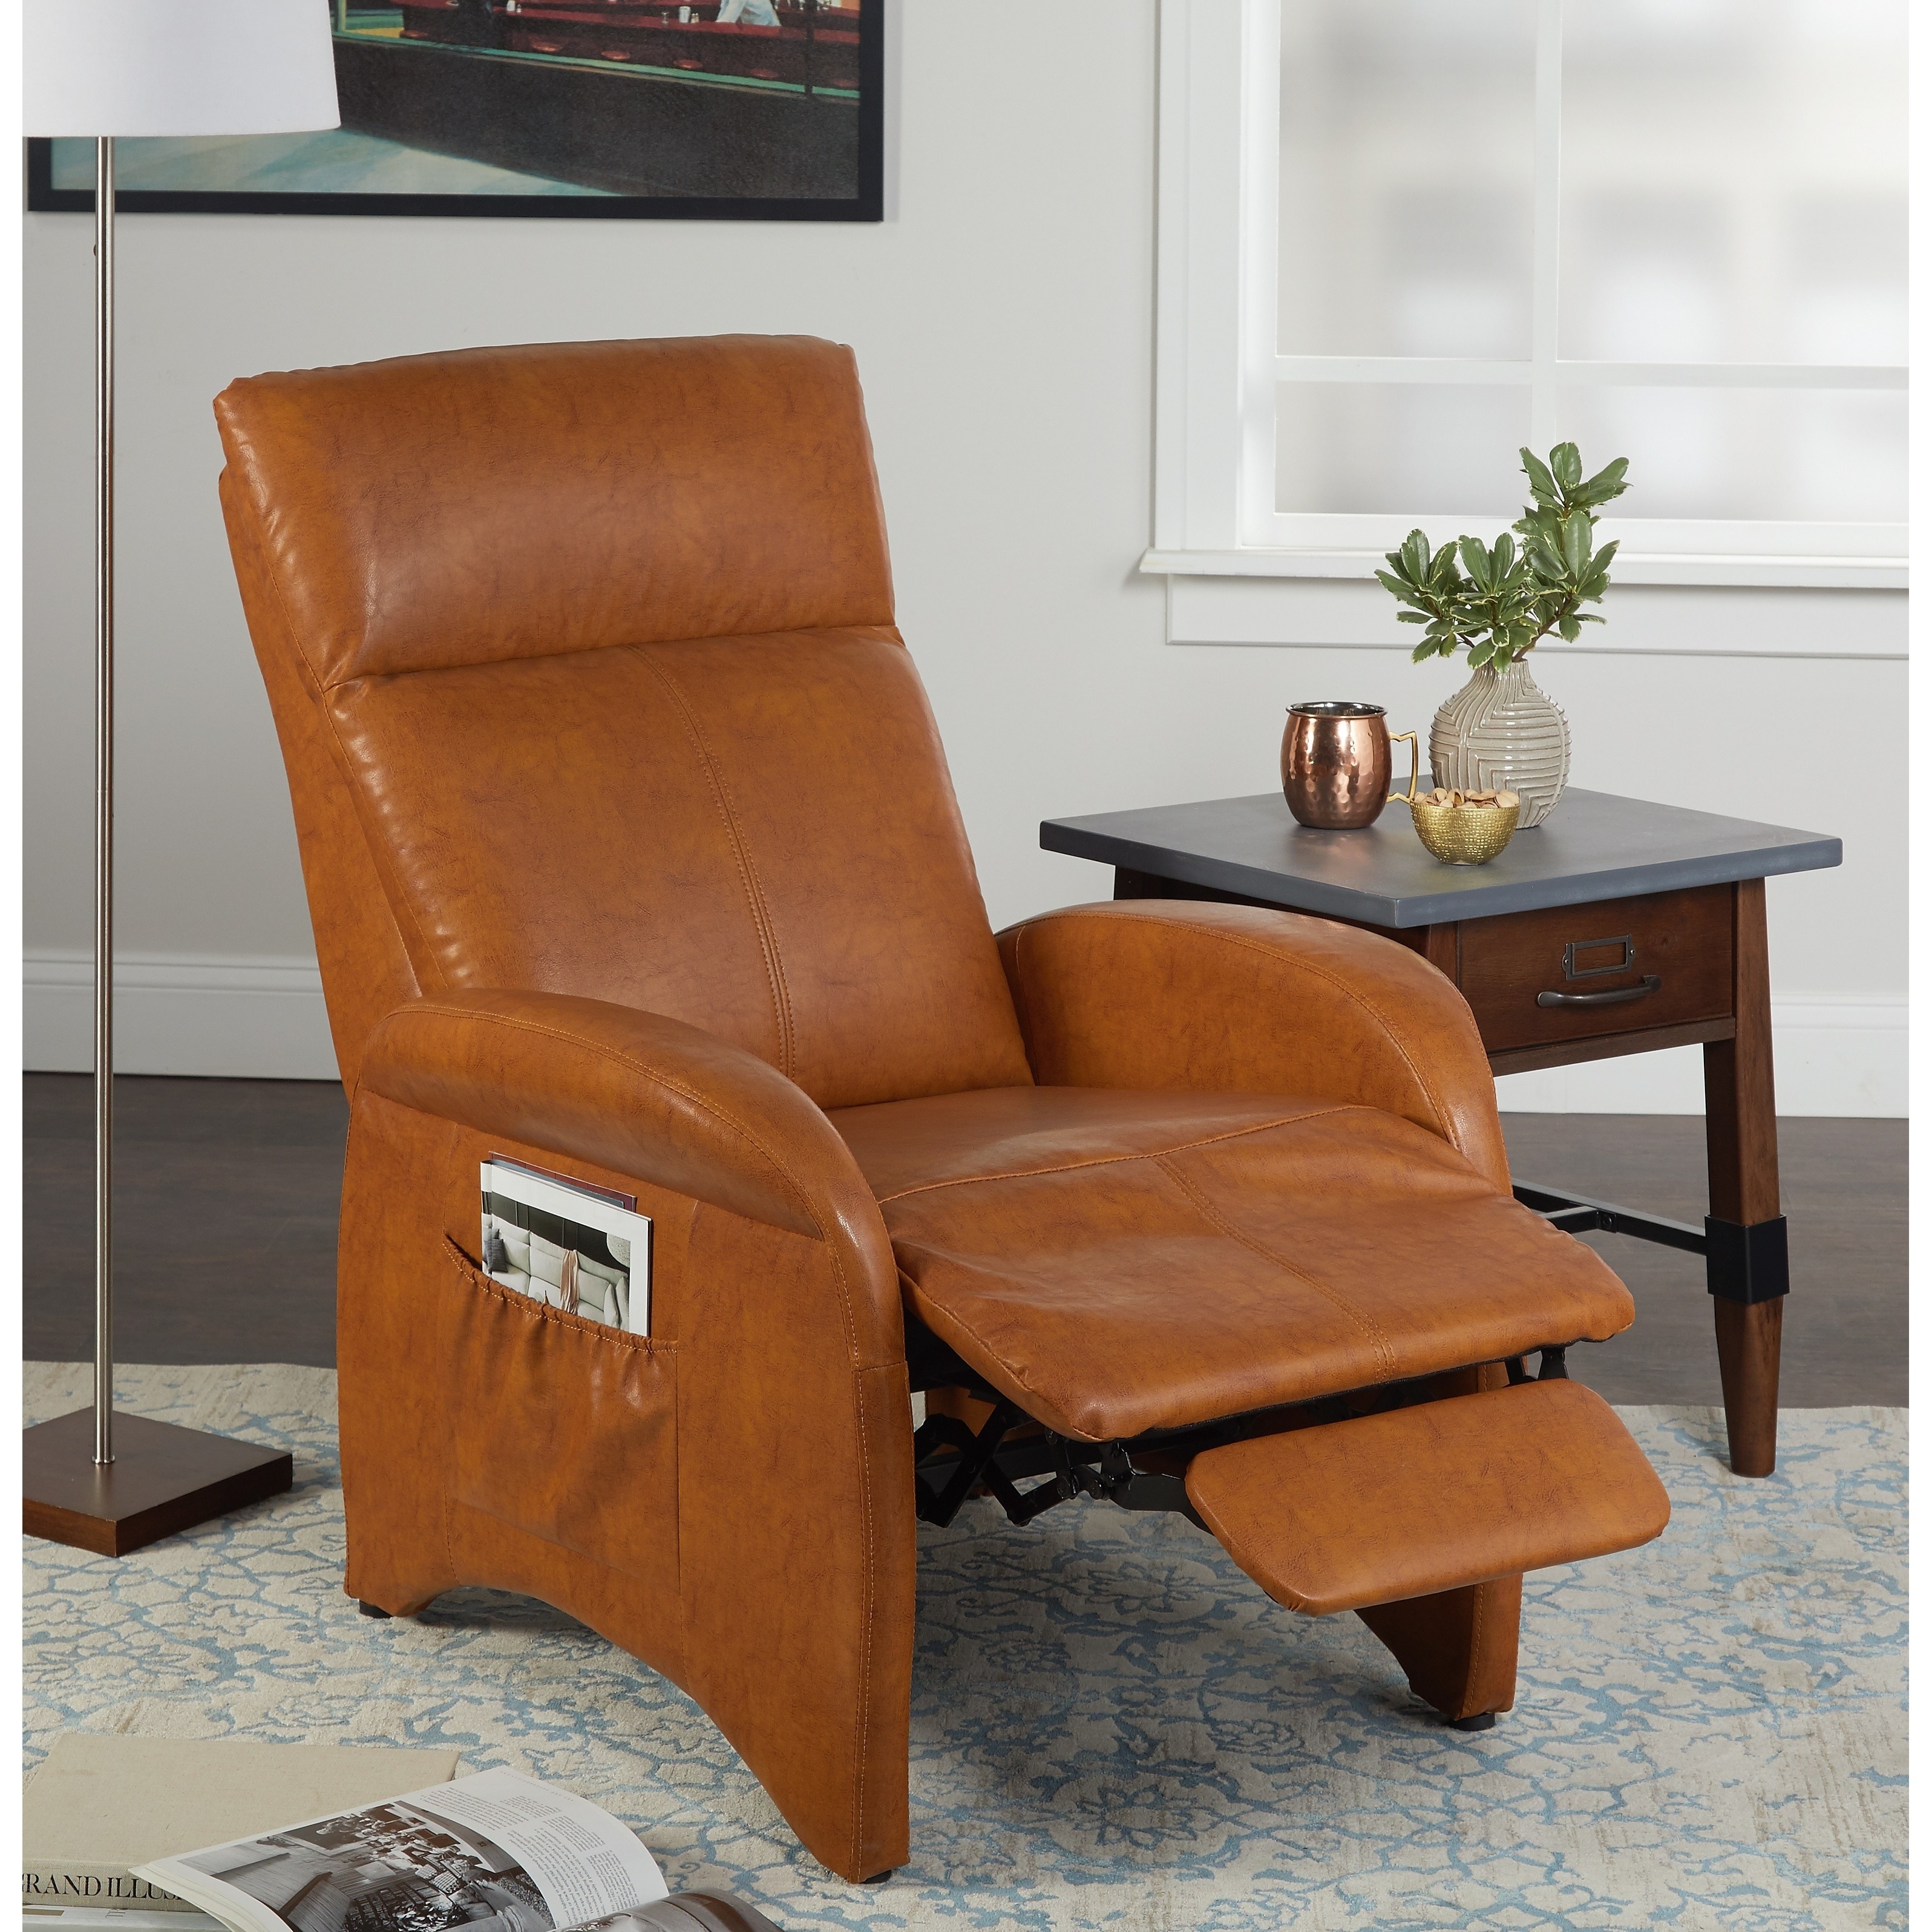 Small Reclining Accent Chair Children Push-back Recliner Lounge